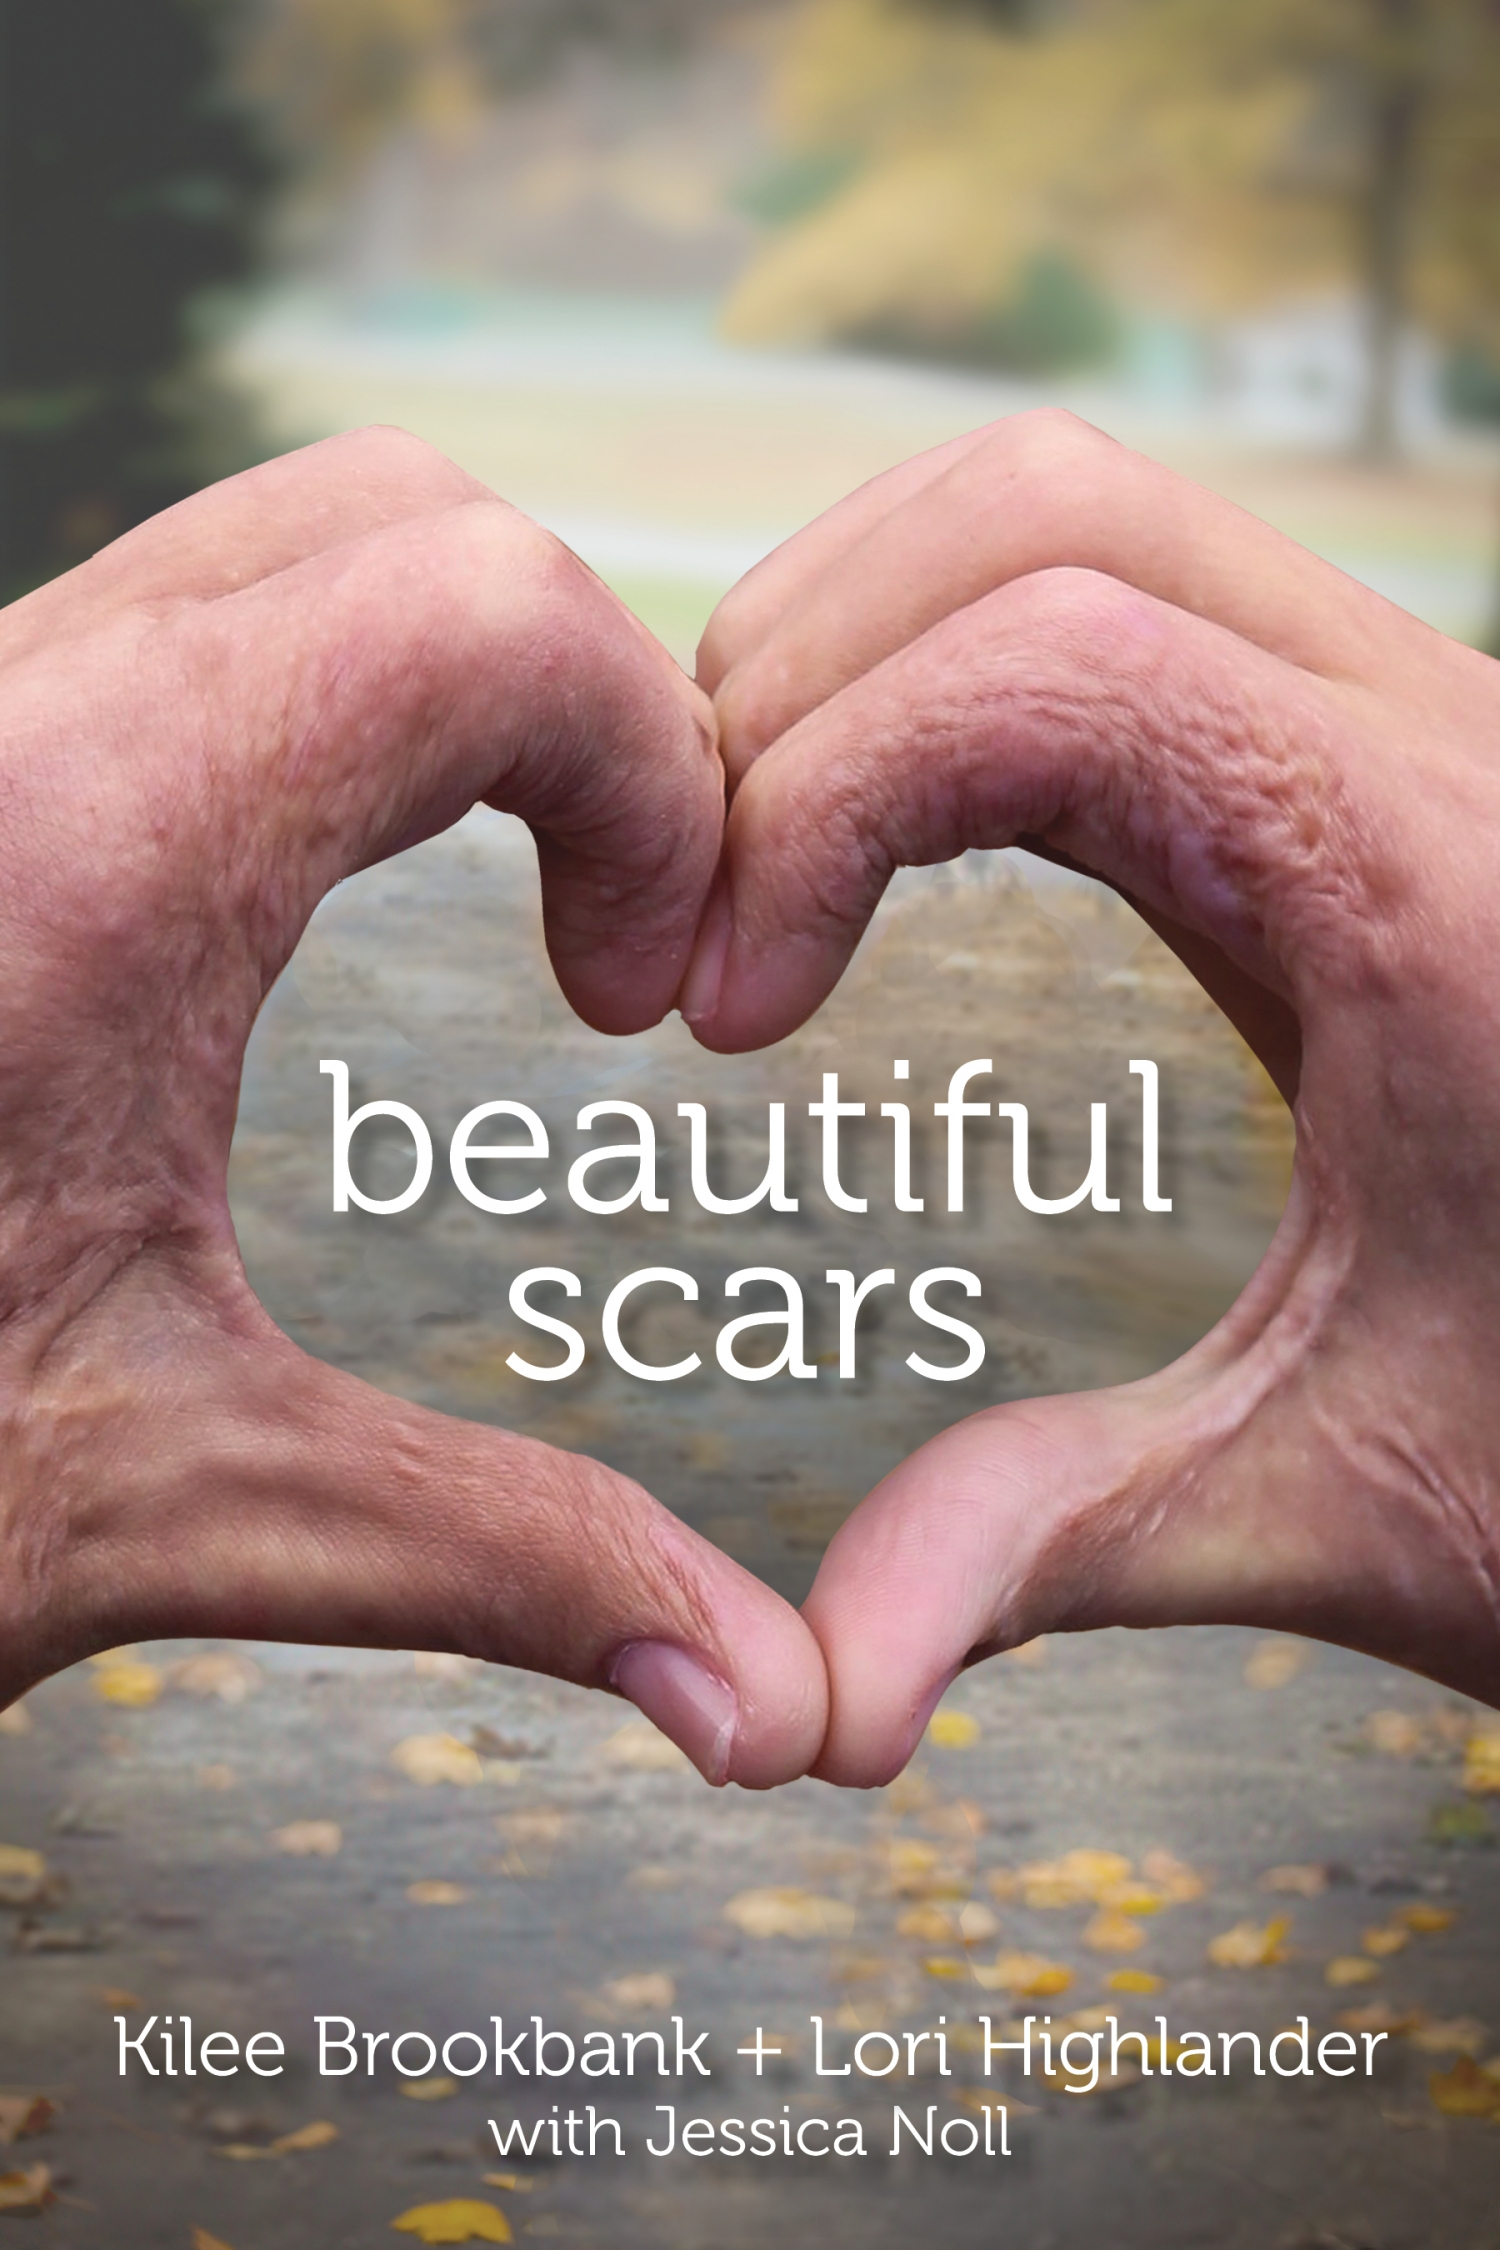 essay about beautiful scars